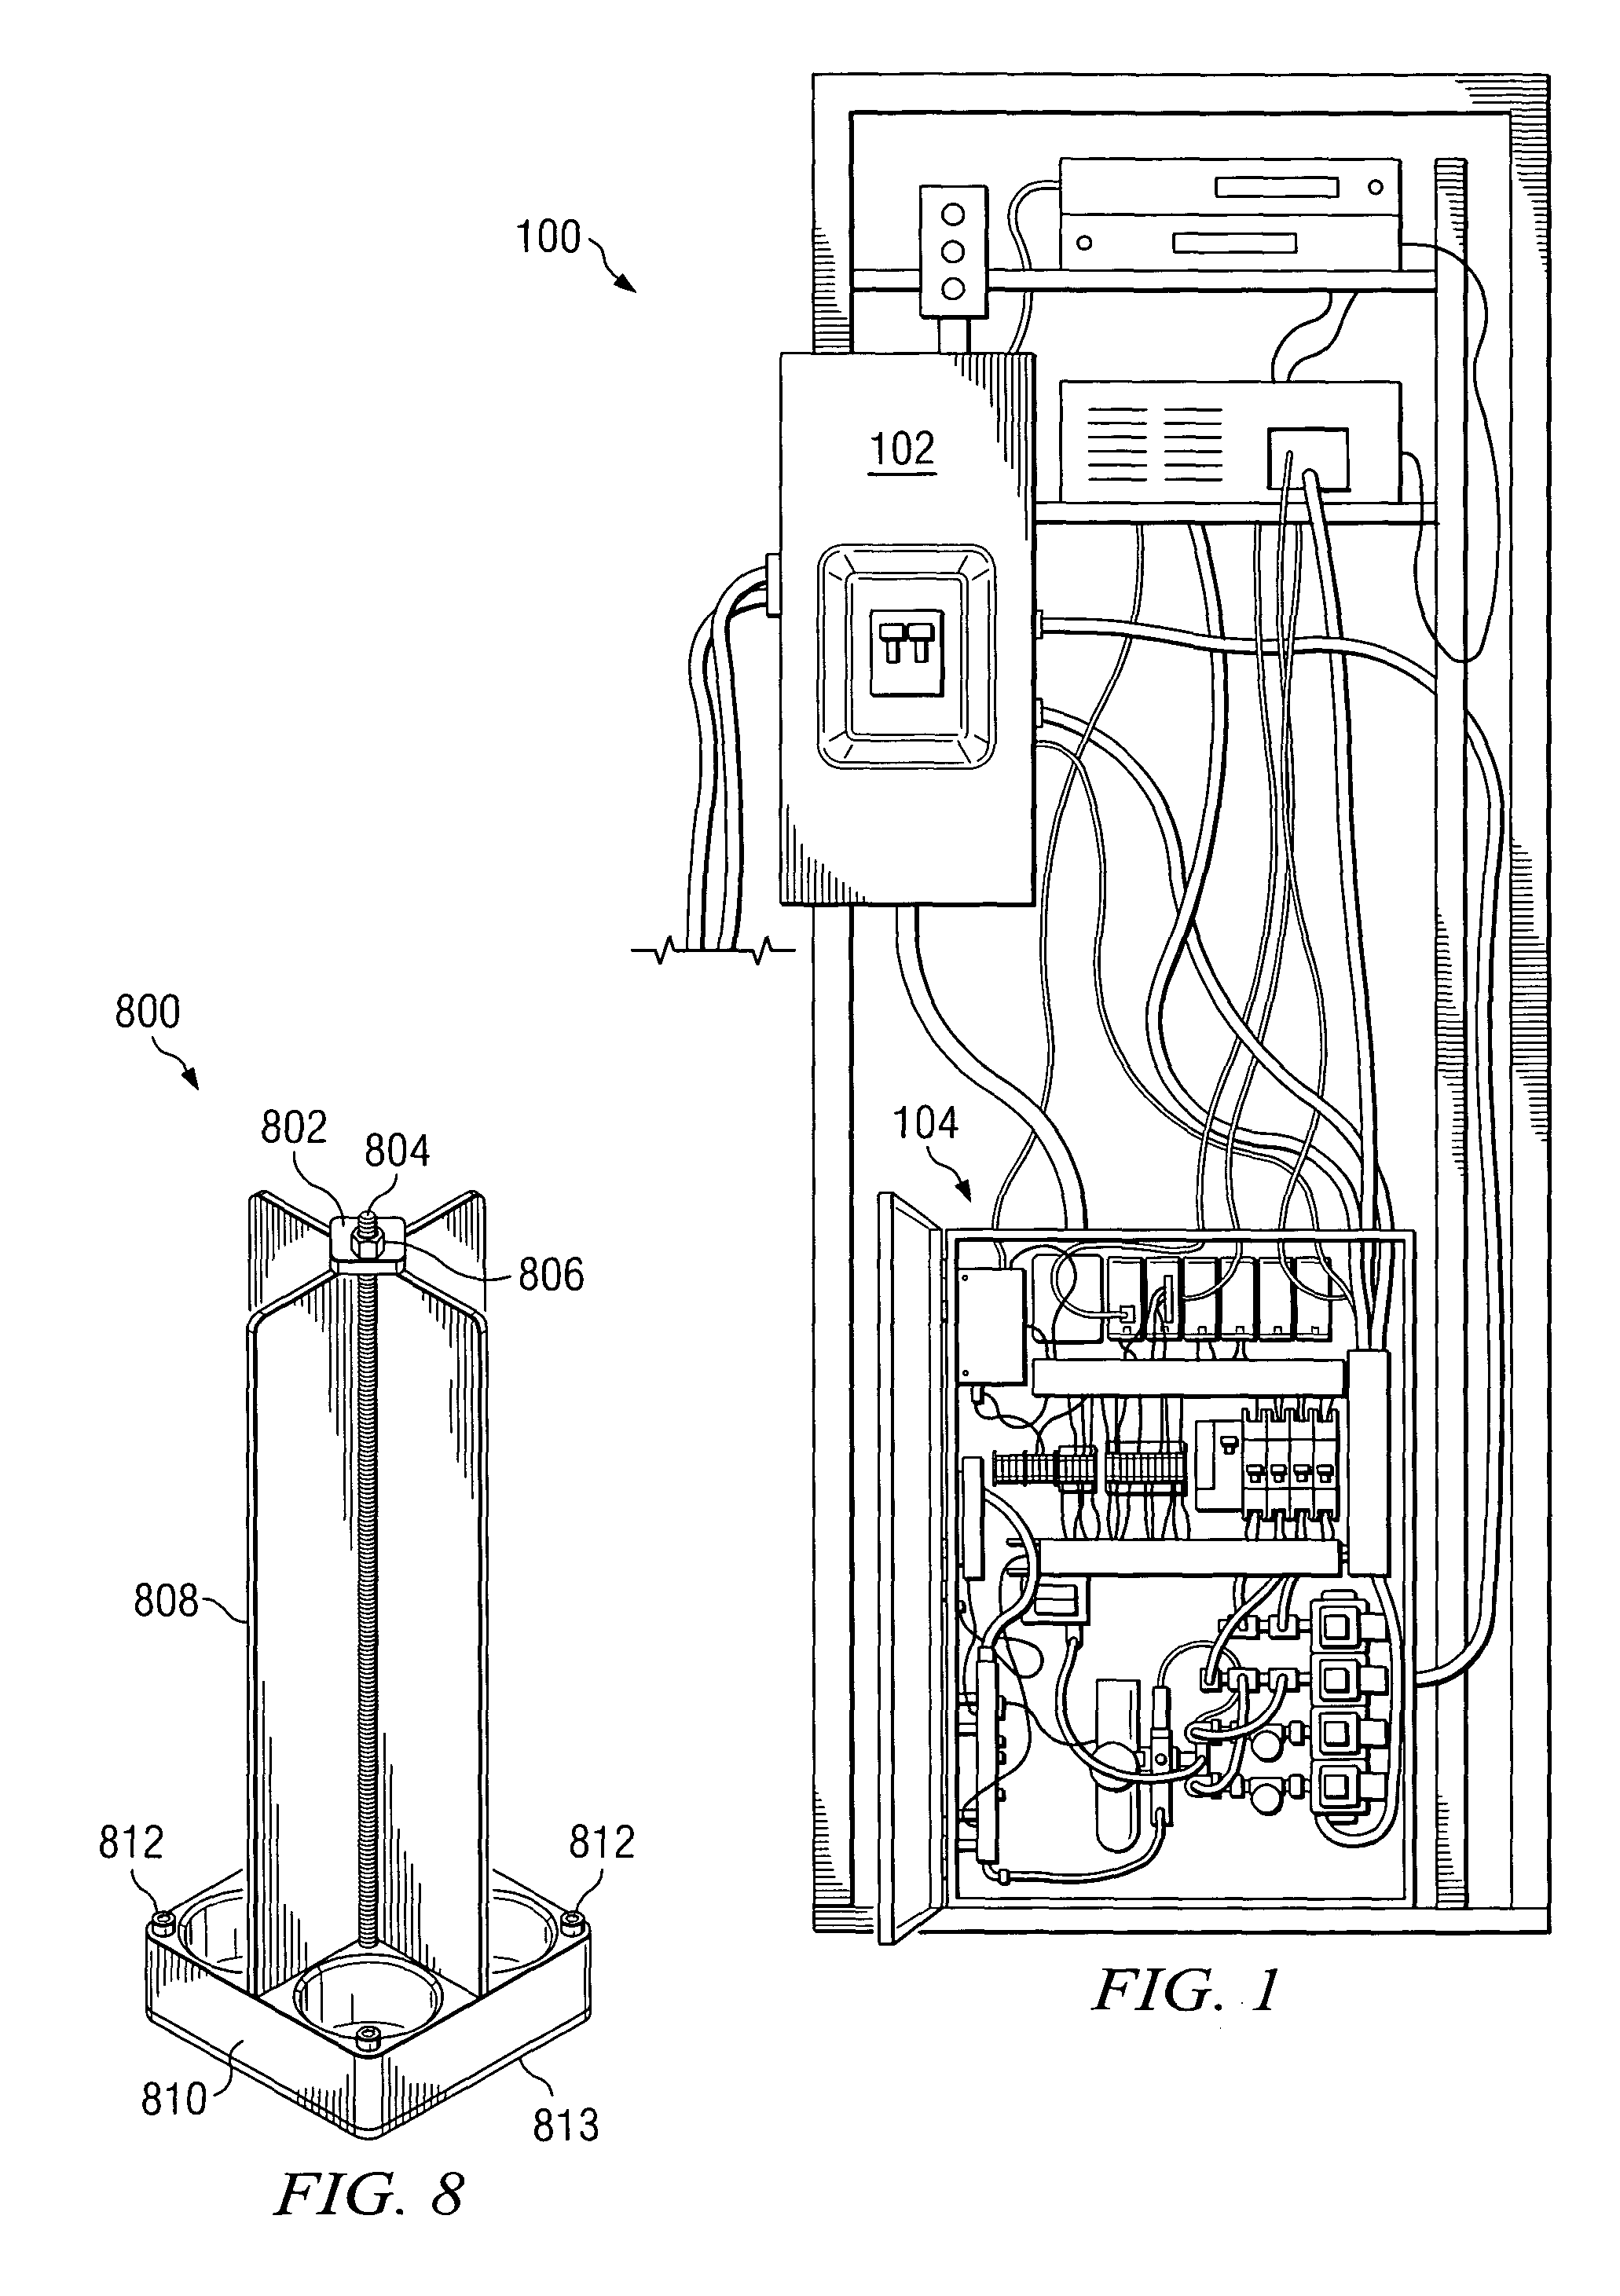 Temperature and condensation control system for functional tester